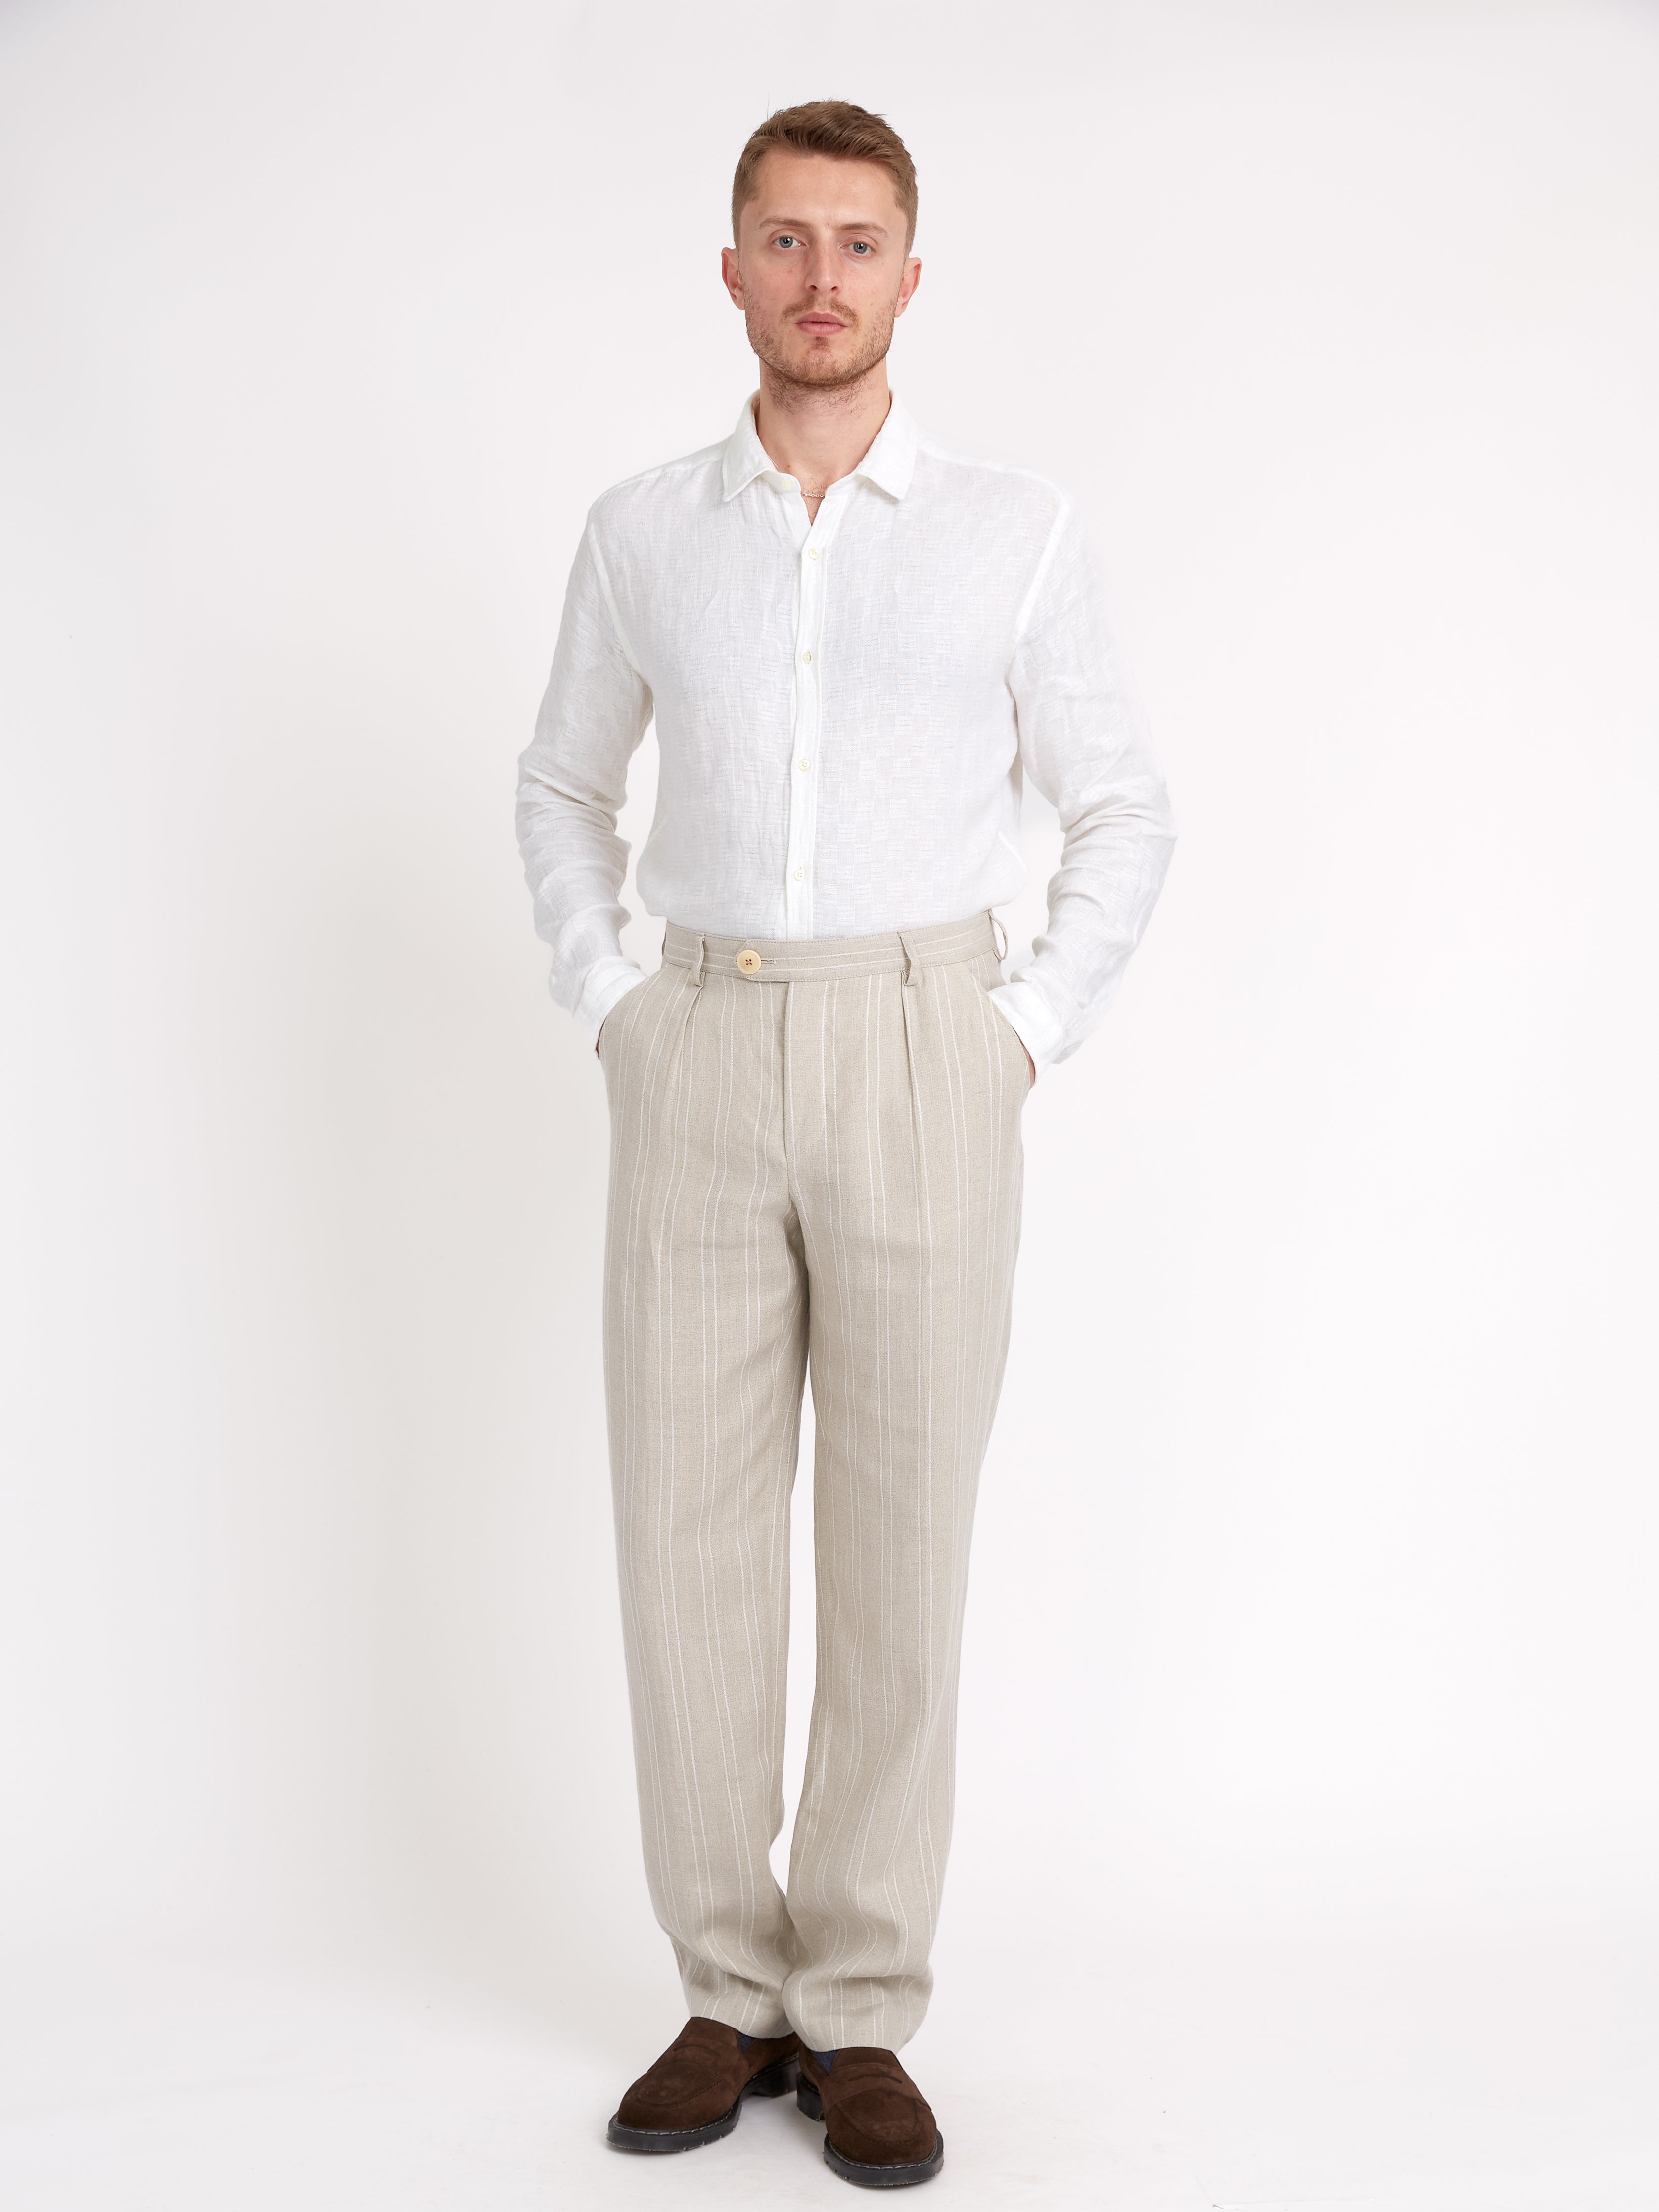 Claremont Trousers Middelboe Sand